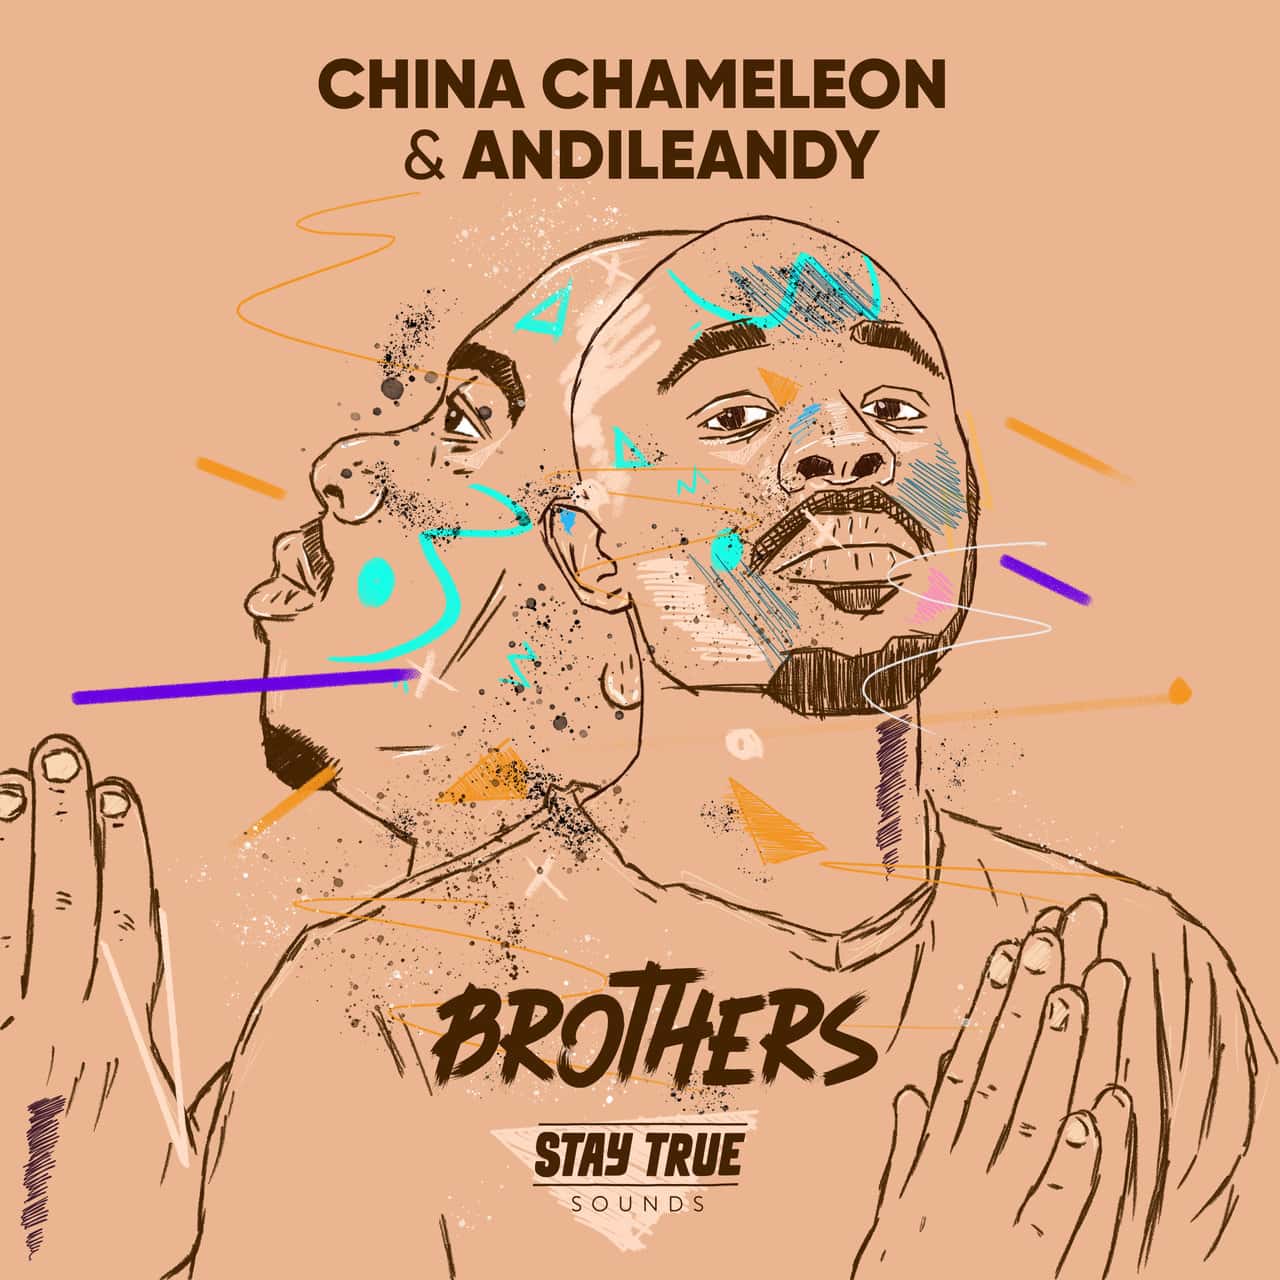 Download China Charmeleon - Brothers on Electrobuzz